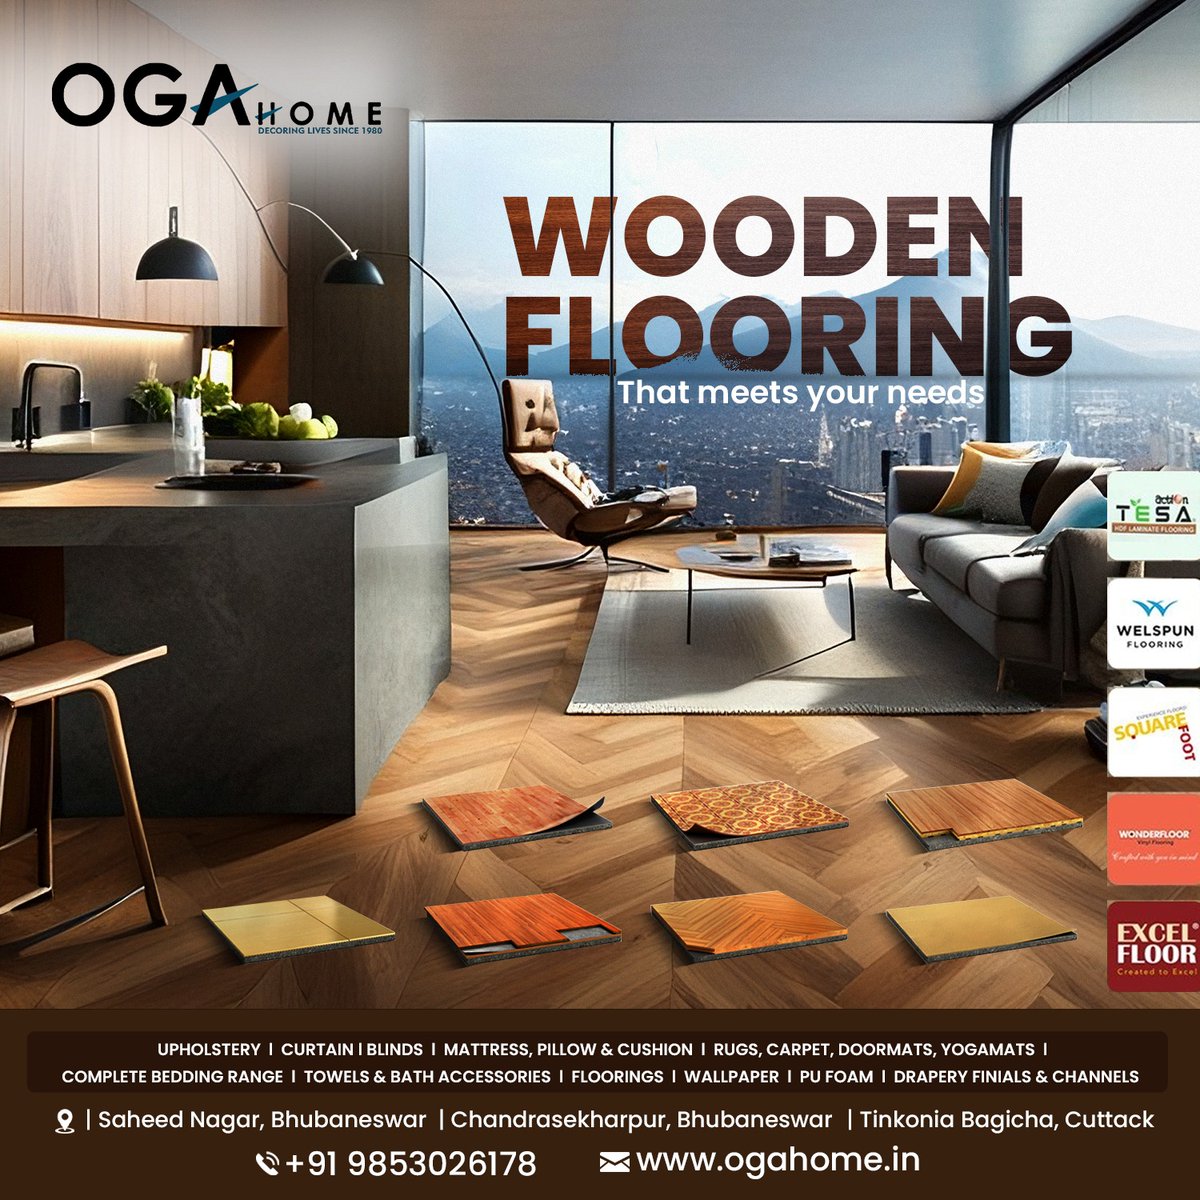 Discover your perfect flooring match at OGA Home! Our budget-friendly options cater to your unique home and lifestyle needs. DM us for more details or give us a call at 098530 26178.
.
#homedecor #kidroomdecor #wallpapers #modernfurniture #livingroom #furniturecollection